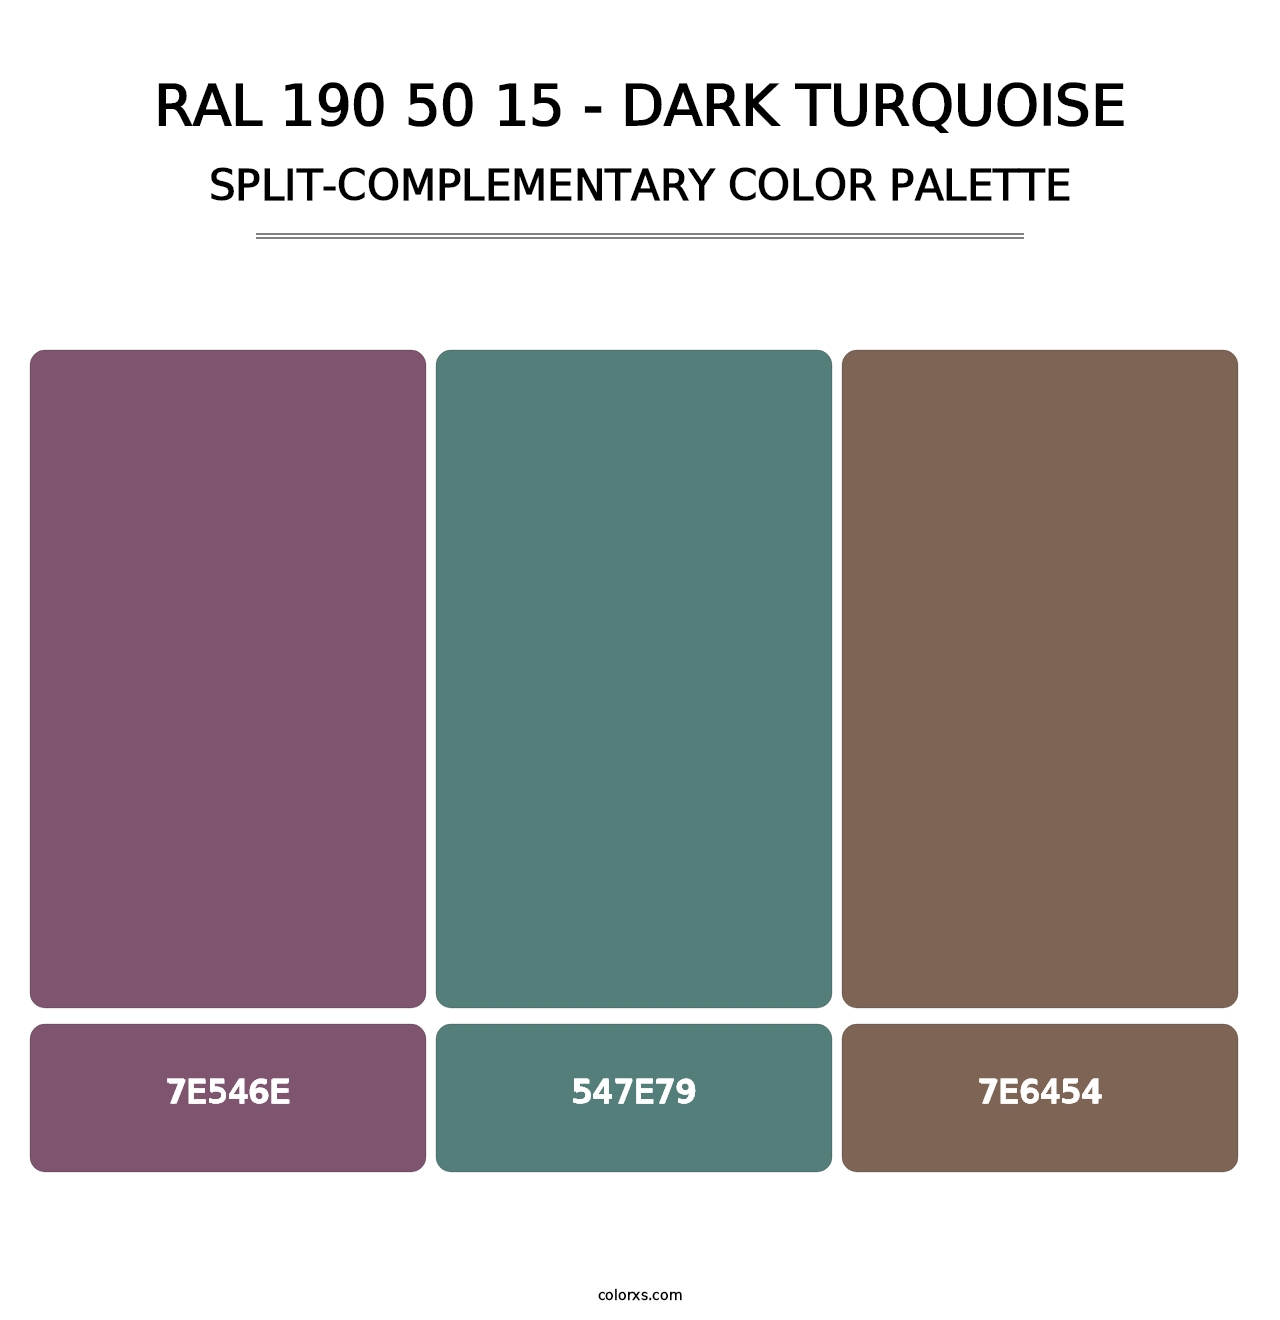 RAL 190 50 15 - Dark Turquoise - Split-Complementary Color Palette